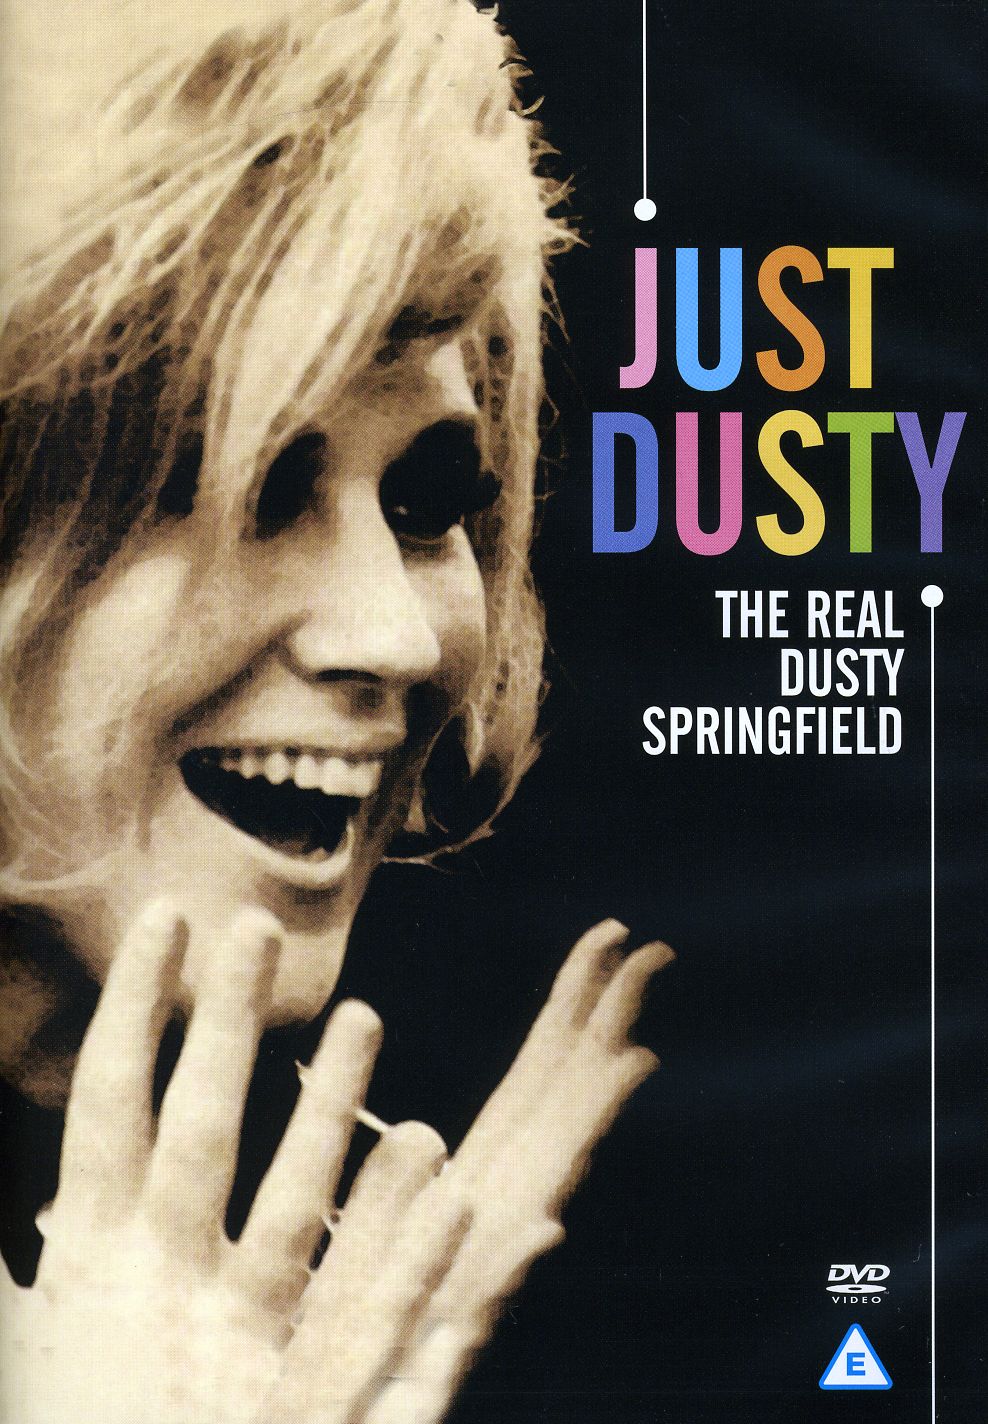 JUST DUSTY: THE REAL DUSTY SPRINGFIELD / (NTR0 UK)